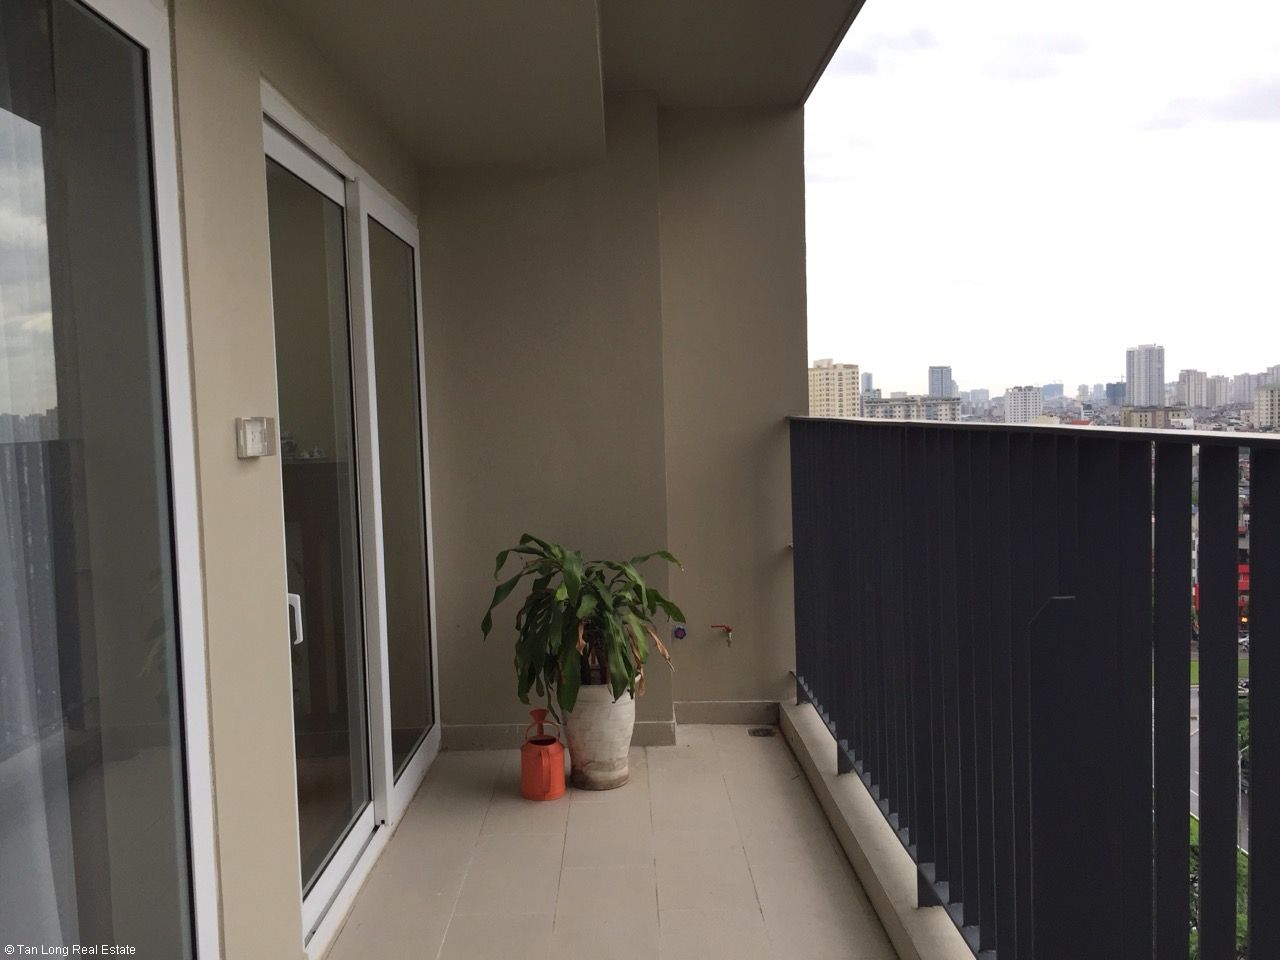 Brand new 3 bedroom furnished apartment in N04 building for rent on Hoang Dao Thuy street, Trung Hoa Nhan Chinh, Cau Giay 6